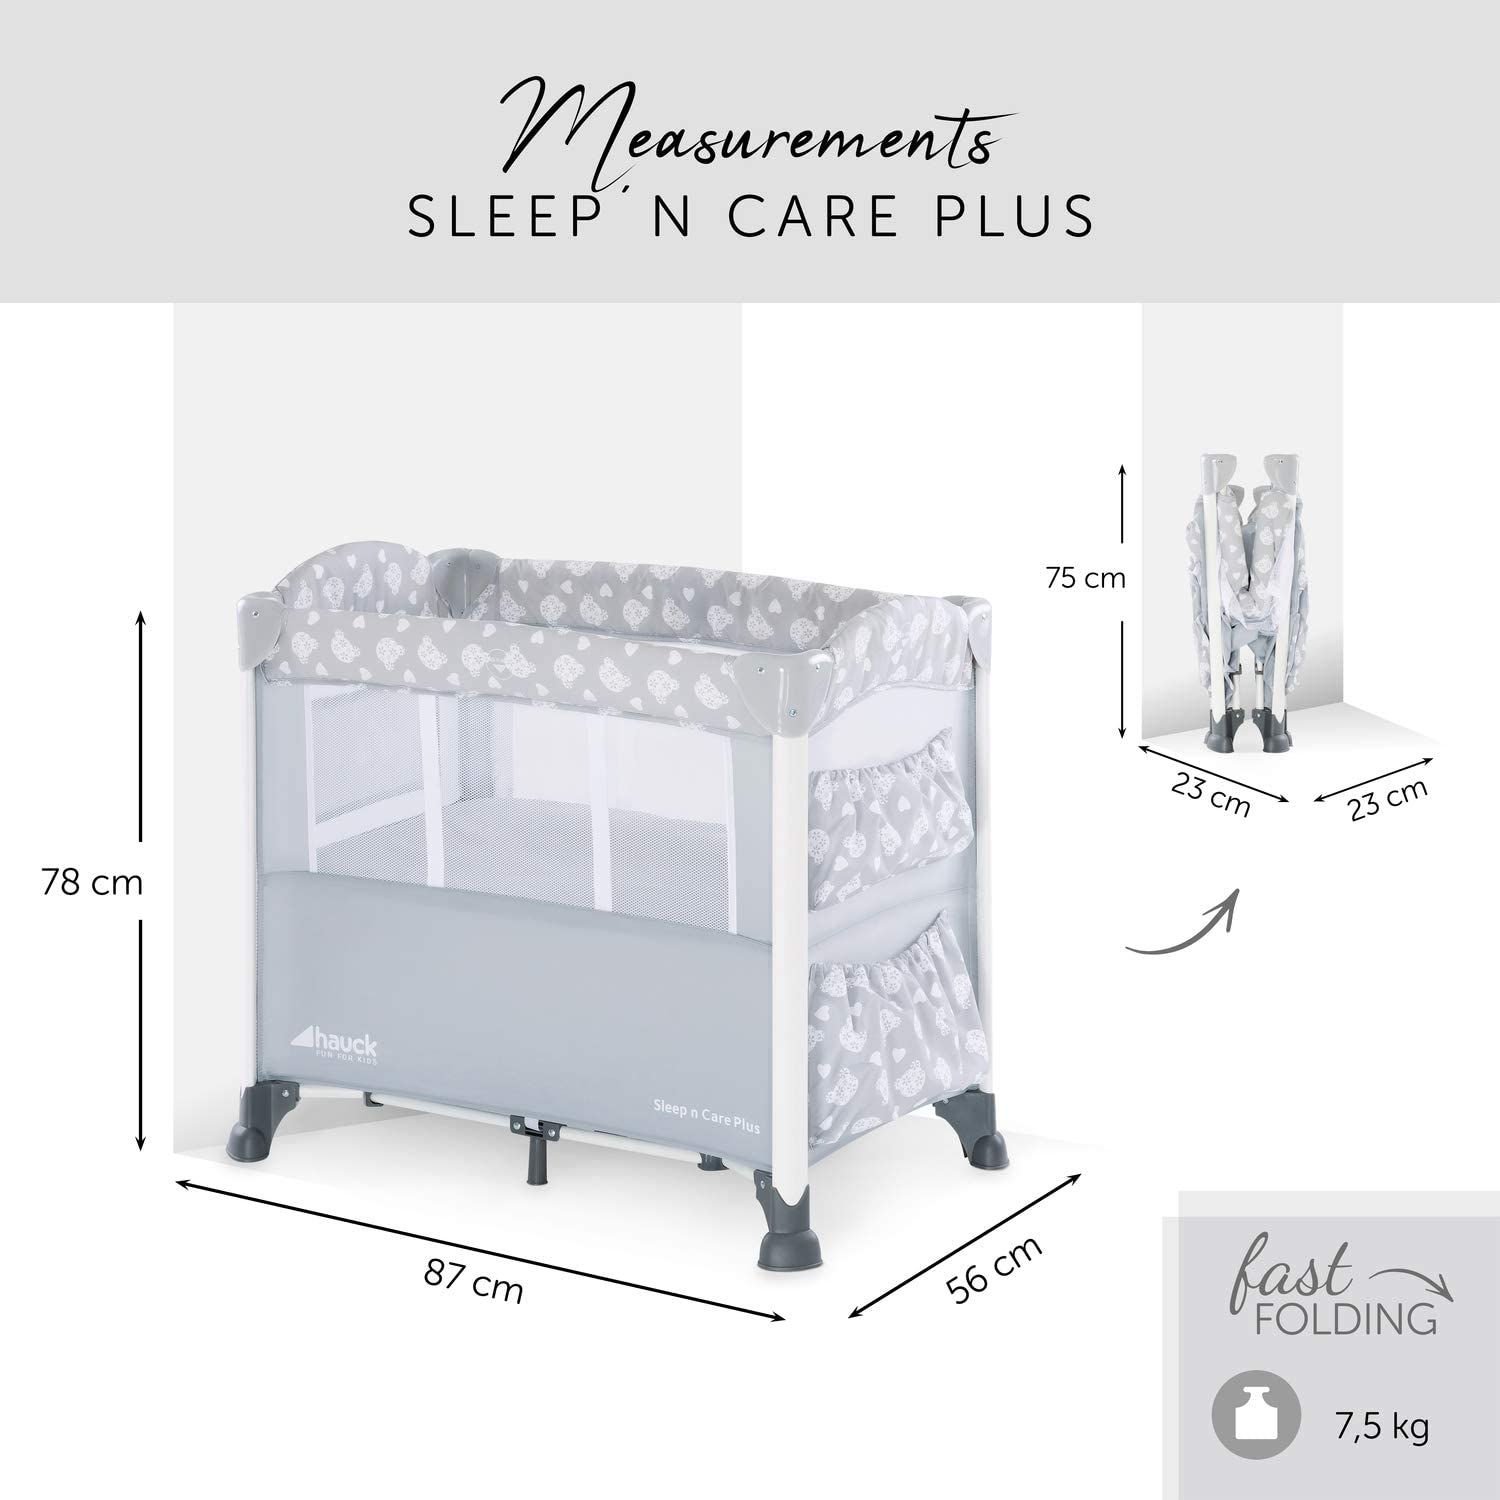 Acplaypen Sleep'n Care Plus, Bedside Cot, Travel Cot from Birth with Lowerable Side Part, Folding Mattress, Wheels, Pockets, Carry Bag, Small Foldable Bed, Teddy Grey